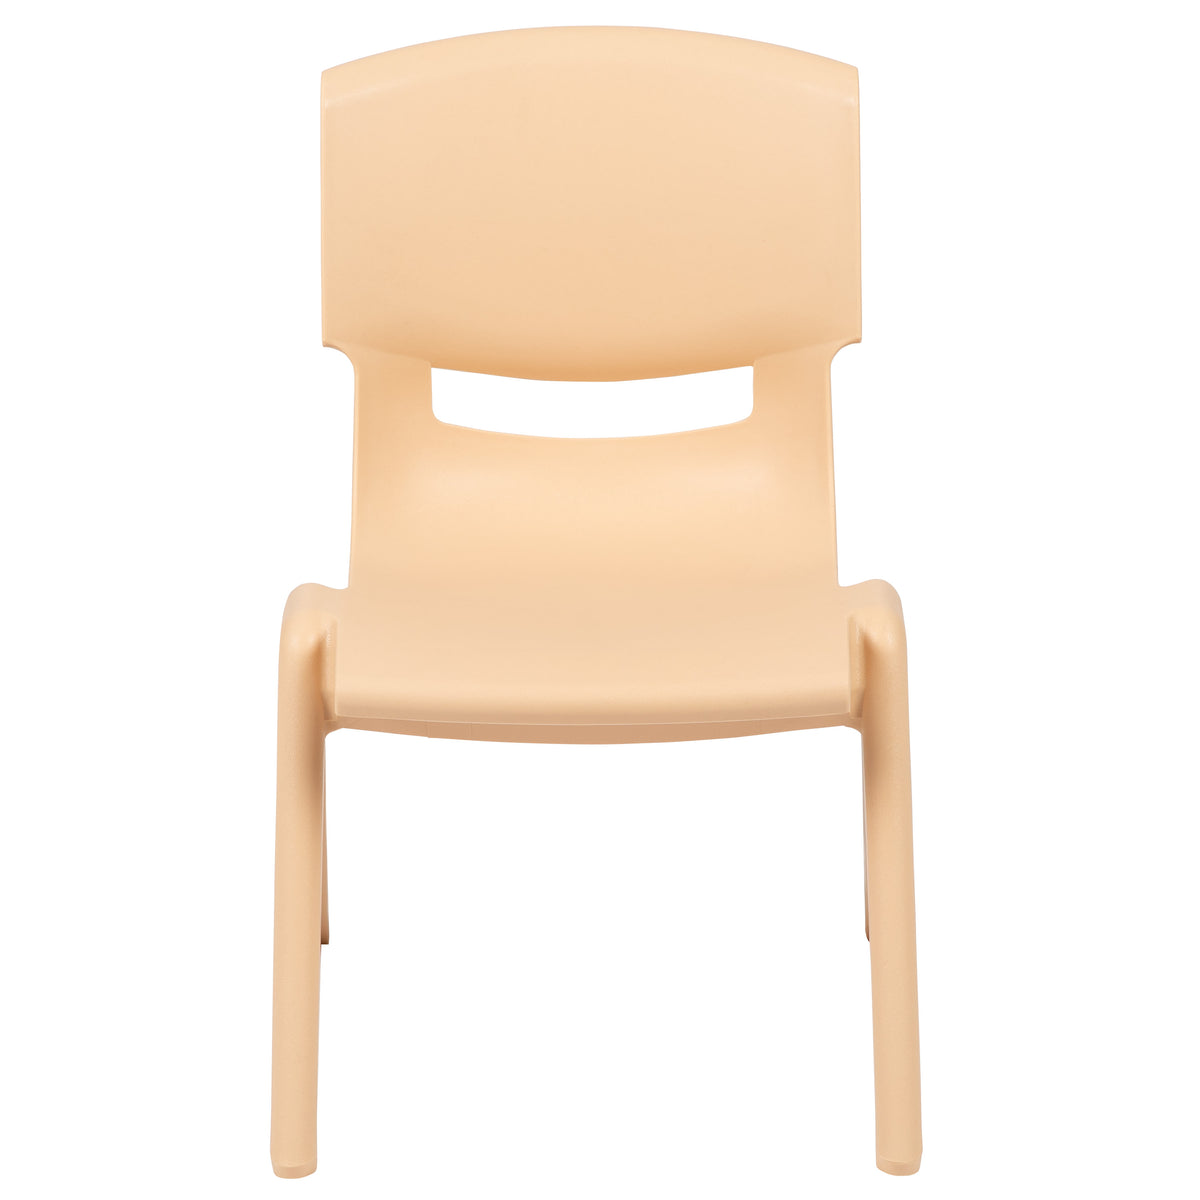 Natural |#| 2 Pack Natural Plastic Stackable School Chair with 10.5inchH Seat, Preschool Chair